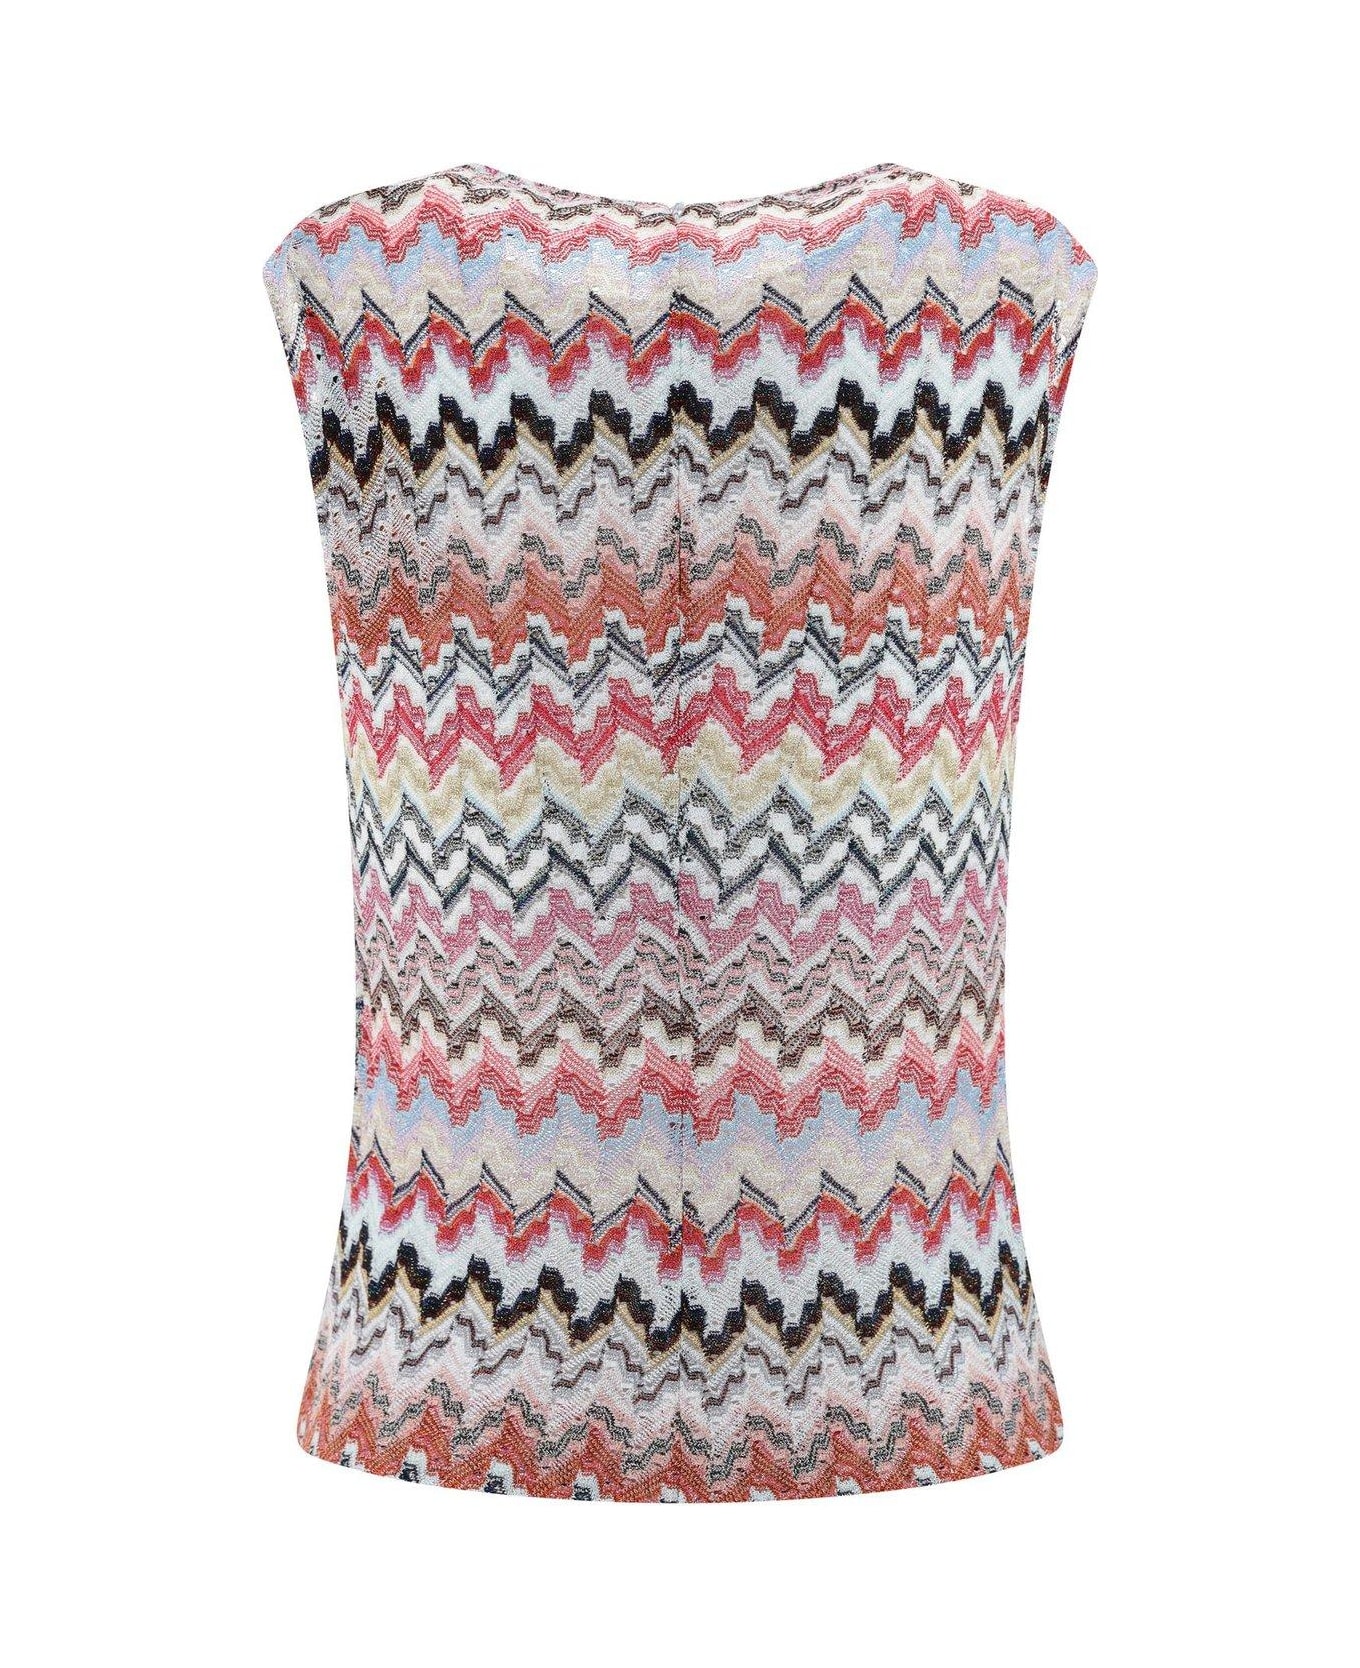 Missoni Zigzag Pattern Knitted Sleeveless Top - MultiColour